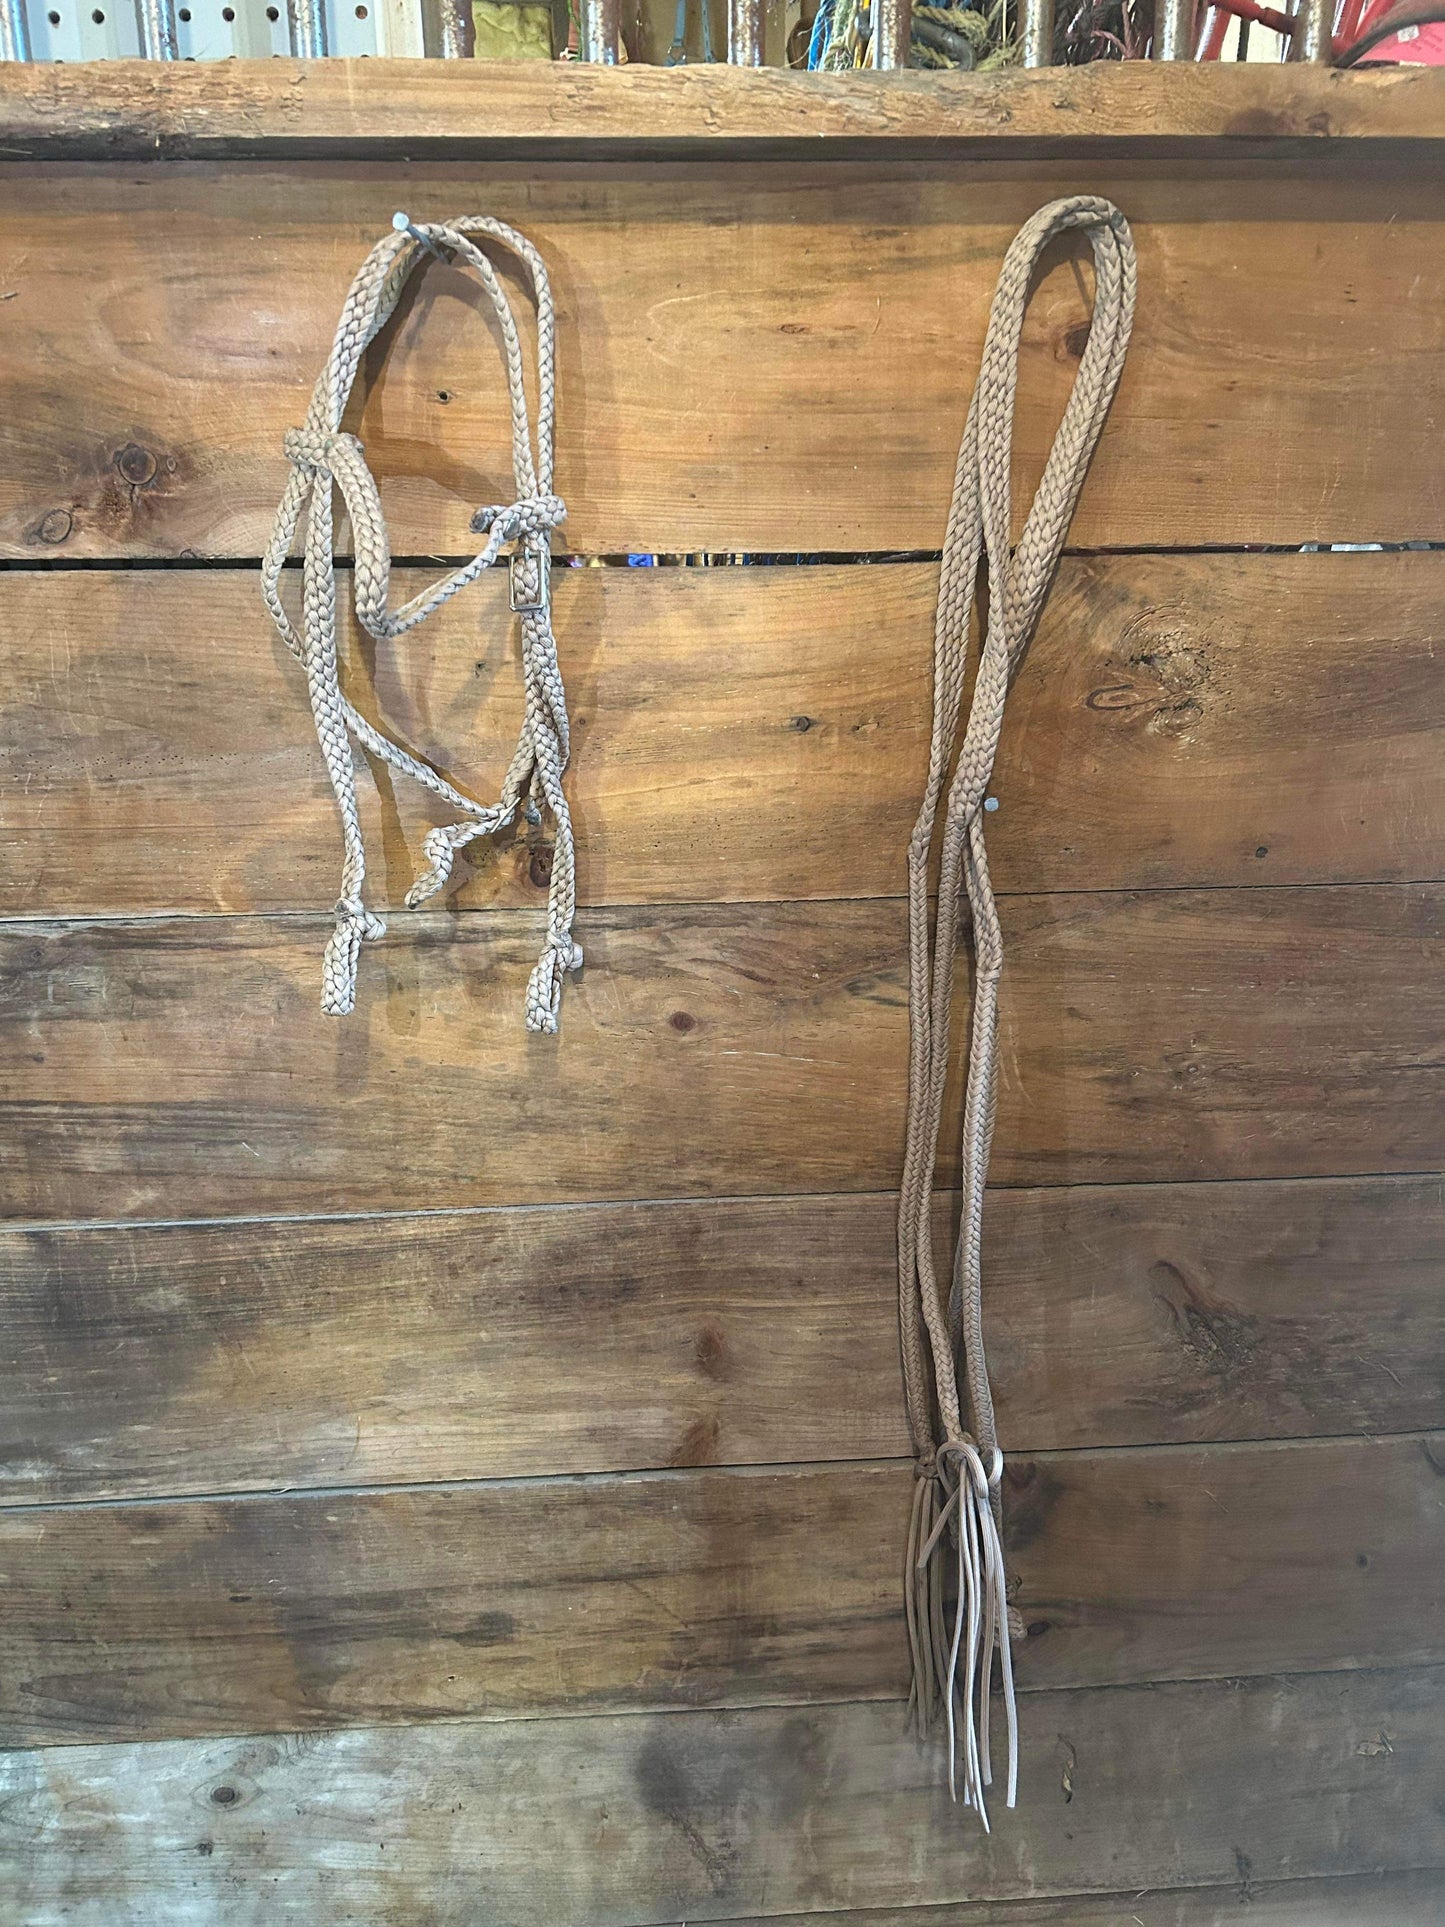 Pony headstall and reins